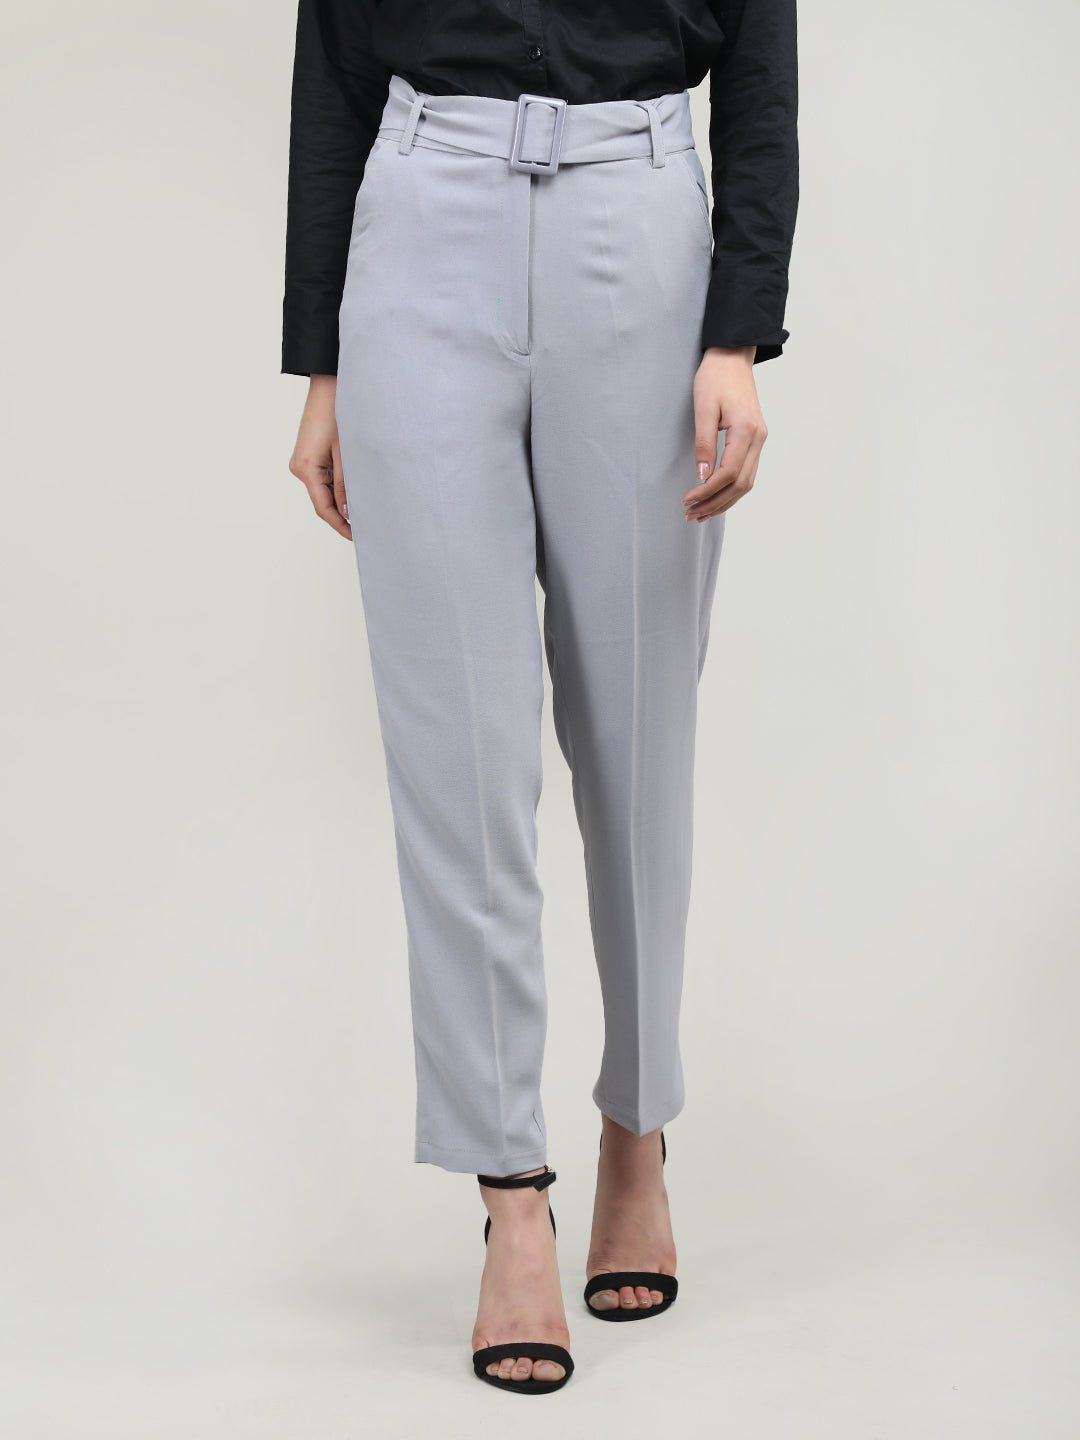 Solid Office Wear TANDUL Women Formal Trousers at Rs 265/piece in Delhi